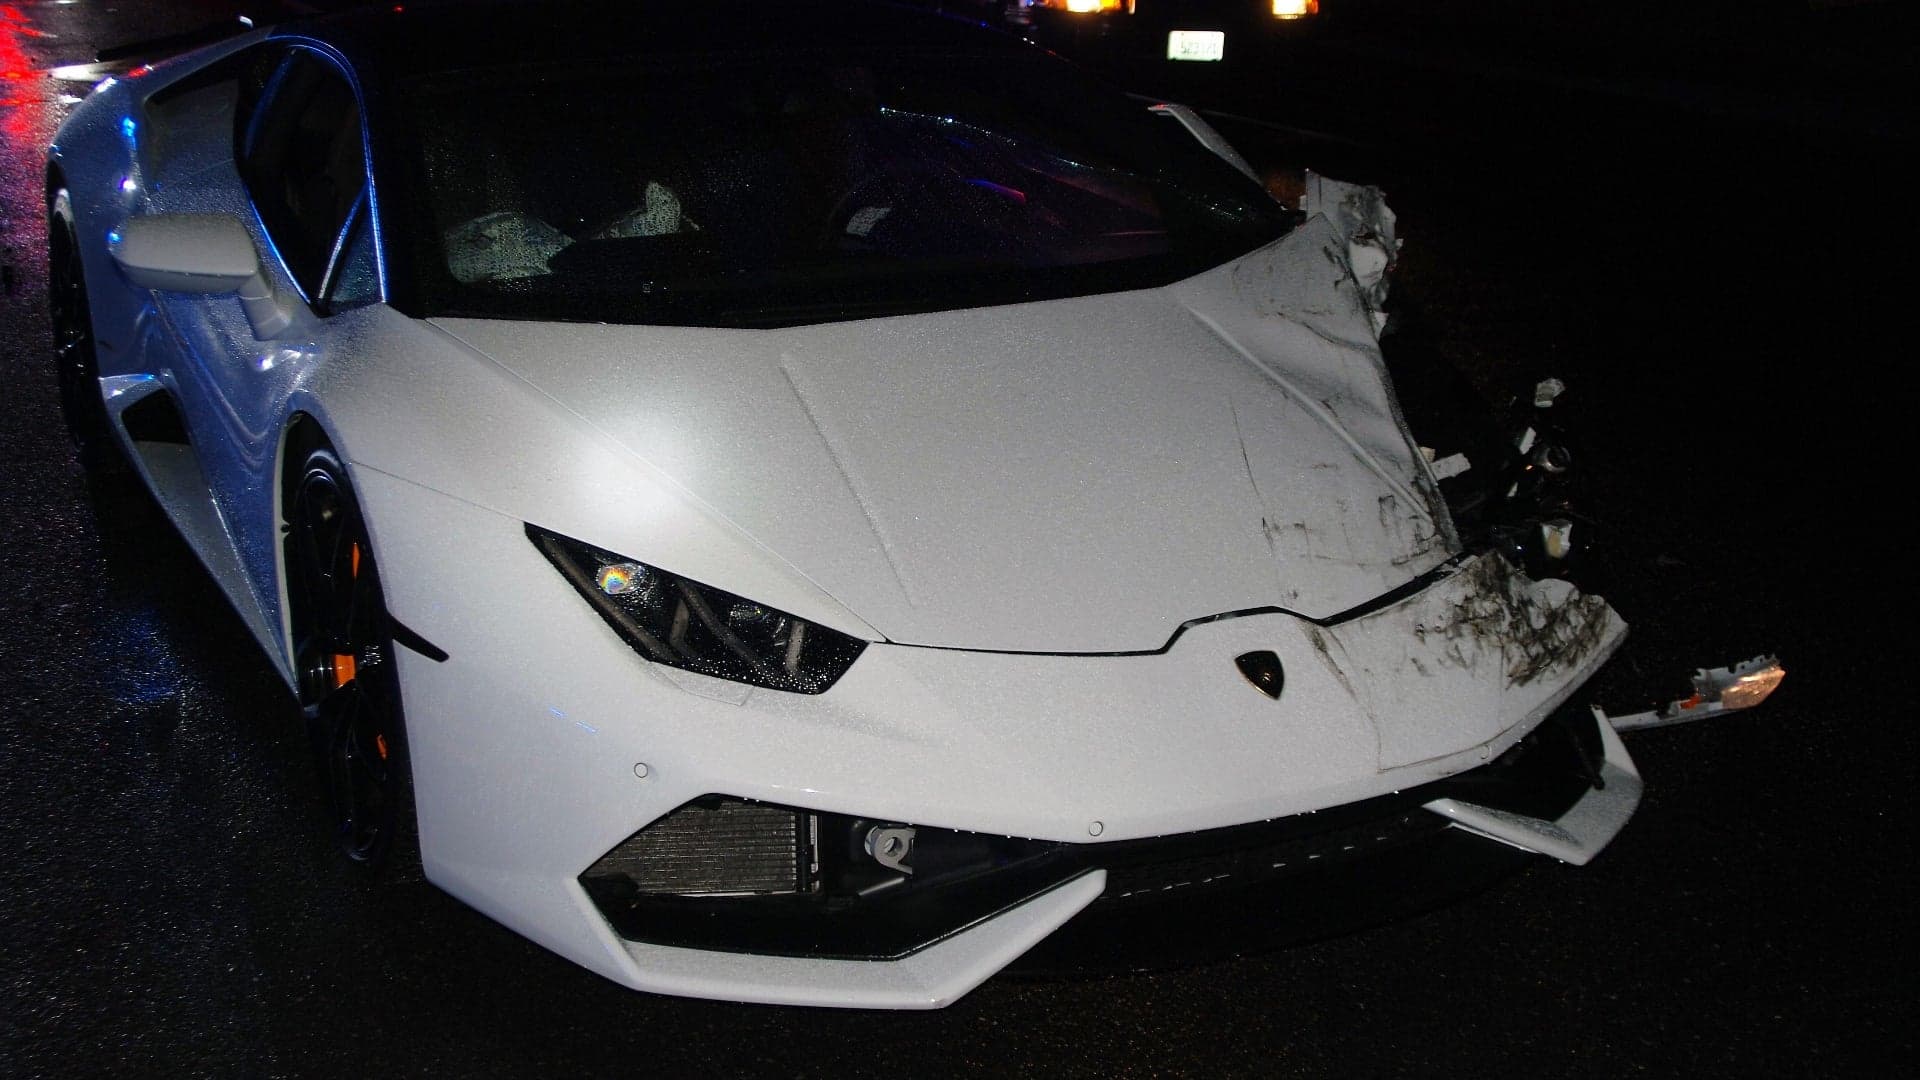 Allegedly Drunken Fool Crashes Rented Lamborghini After Police Chase